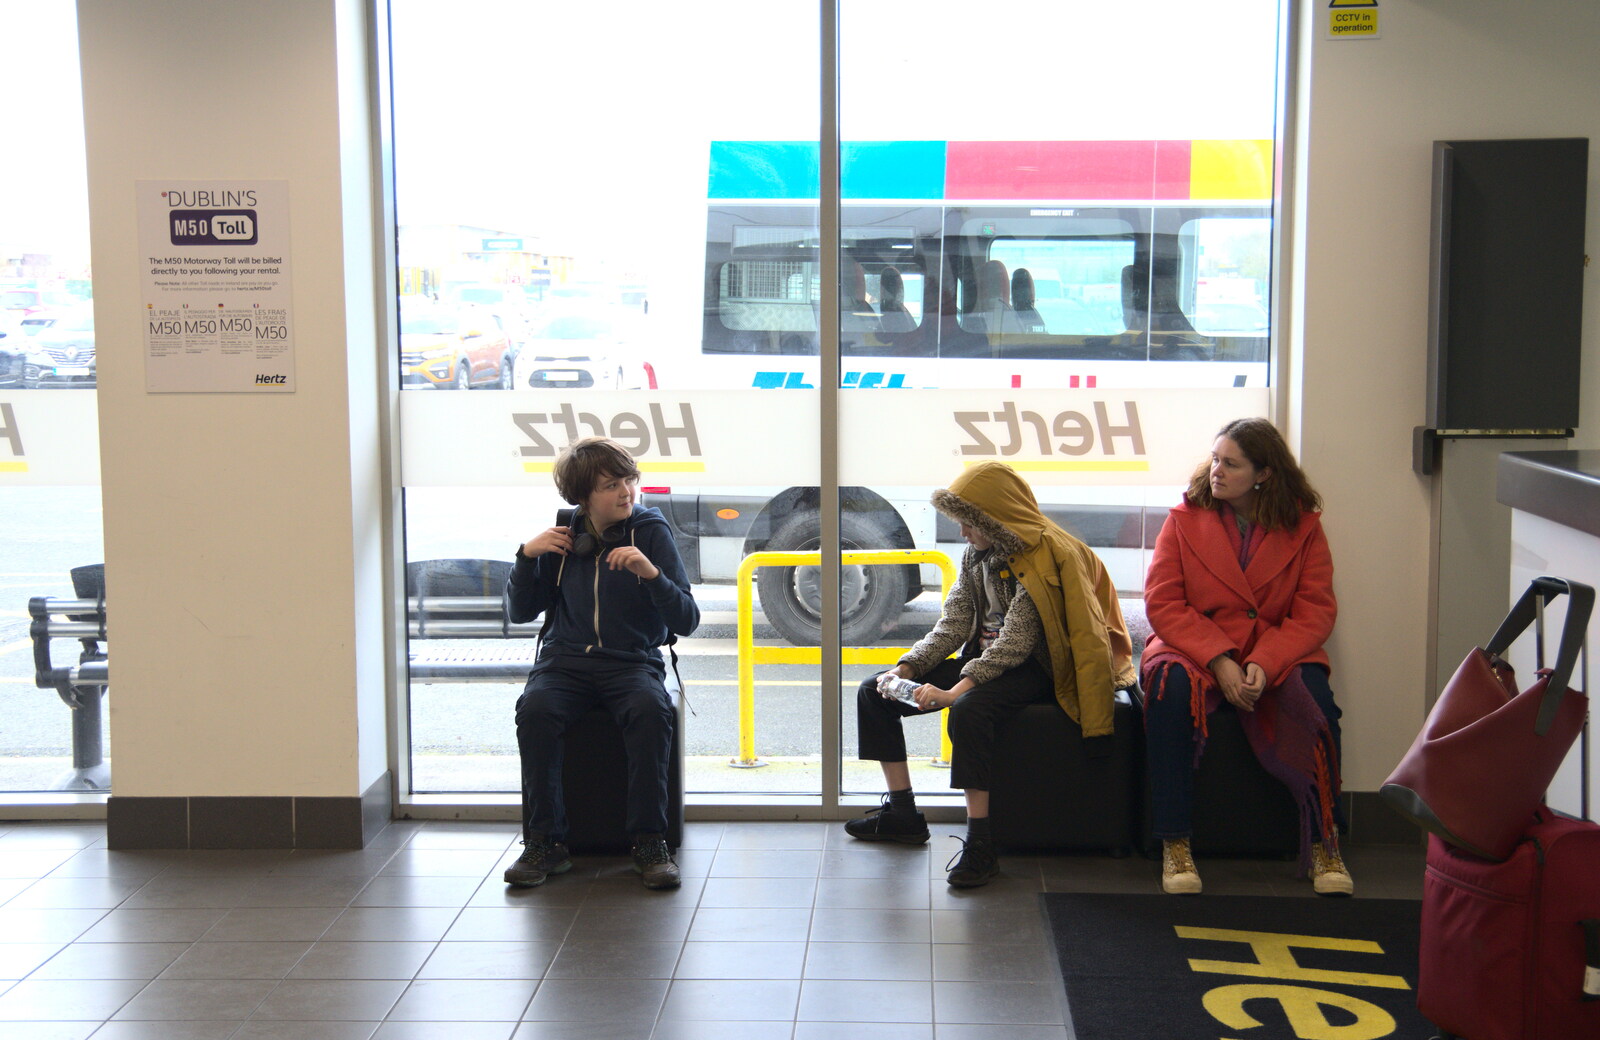 Blackrock North and Newgrange, County Louth, Ireland - 16th February 2023: We wait in the Hertz/Dollar car-hire office